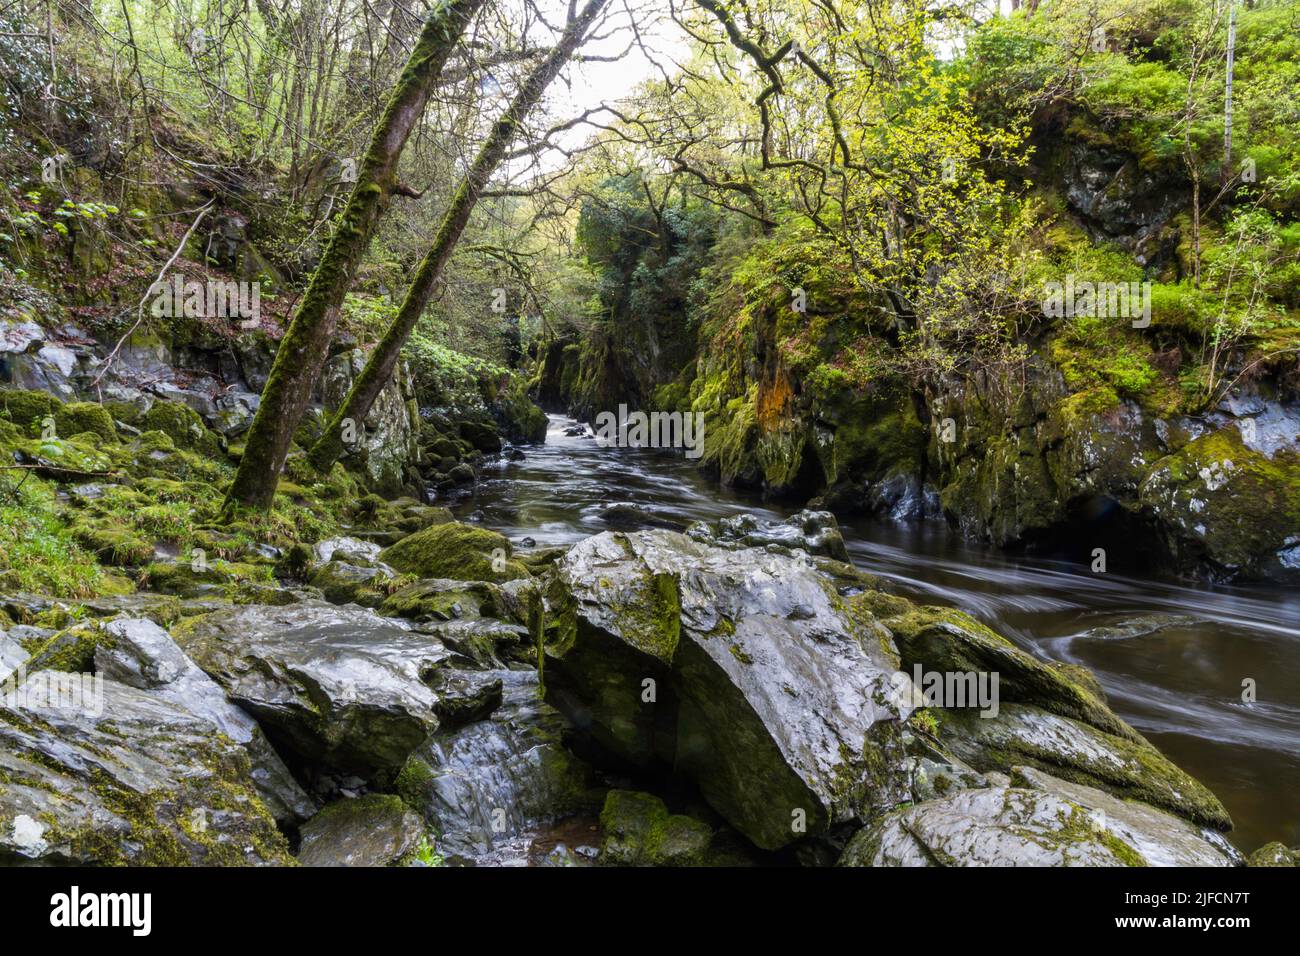 Beautiful Gorge with river The Fairy Glen, Betws-y-Coed, Snowdonia, Wales, UK, landscape and wide angle Stock Photo